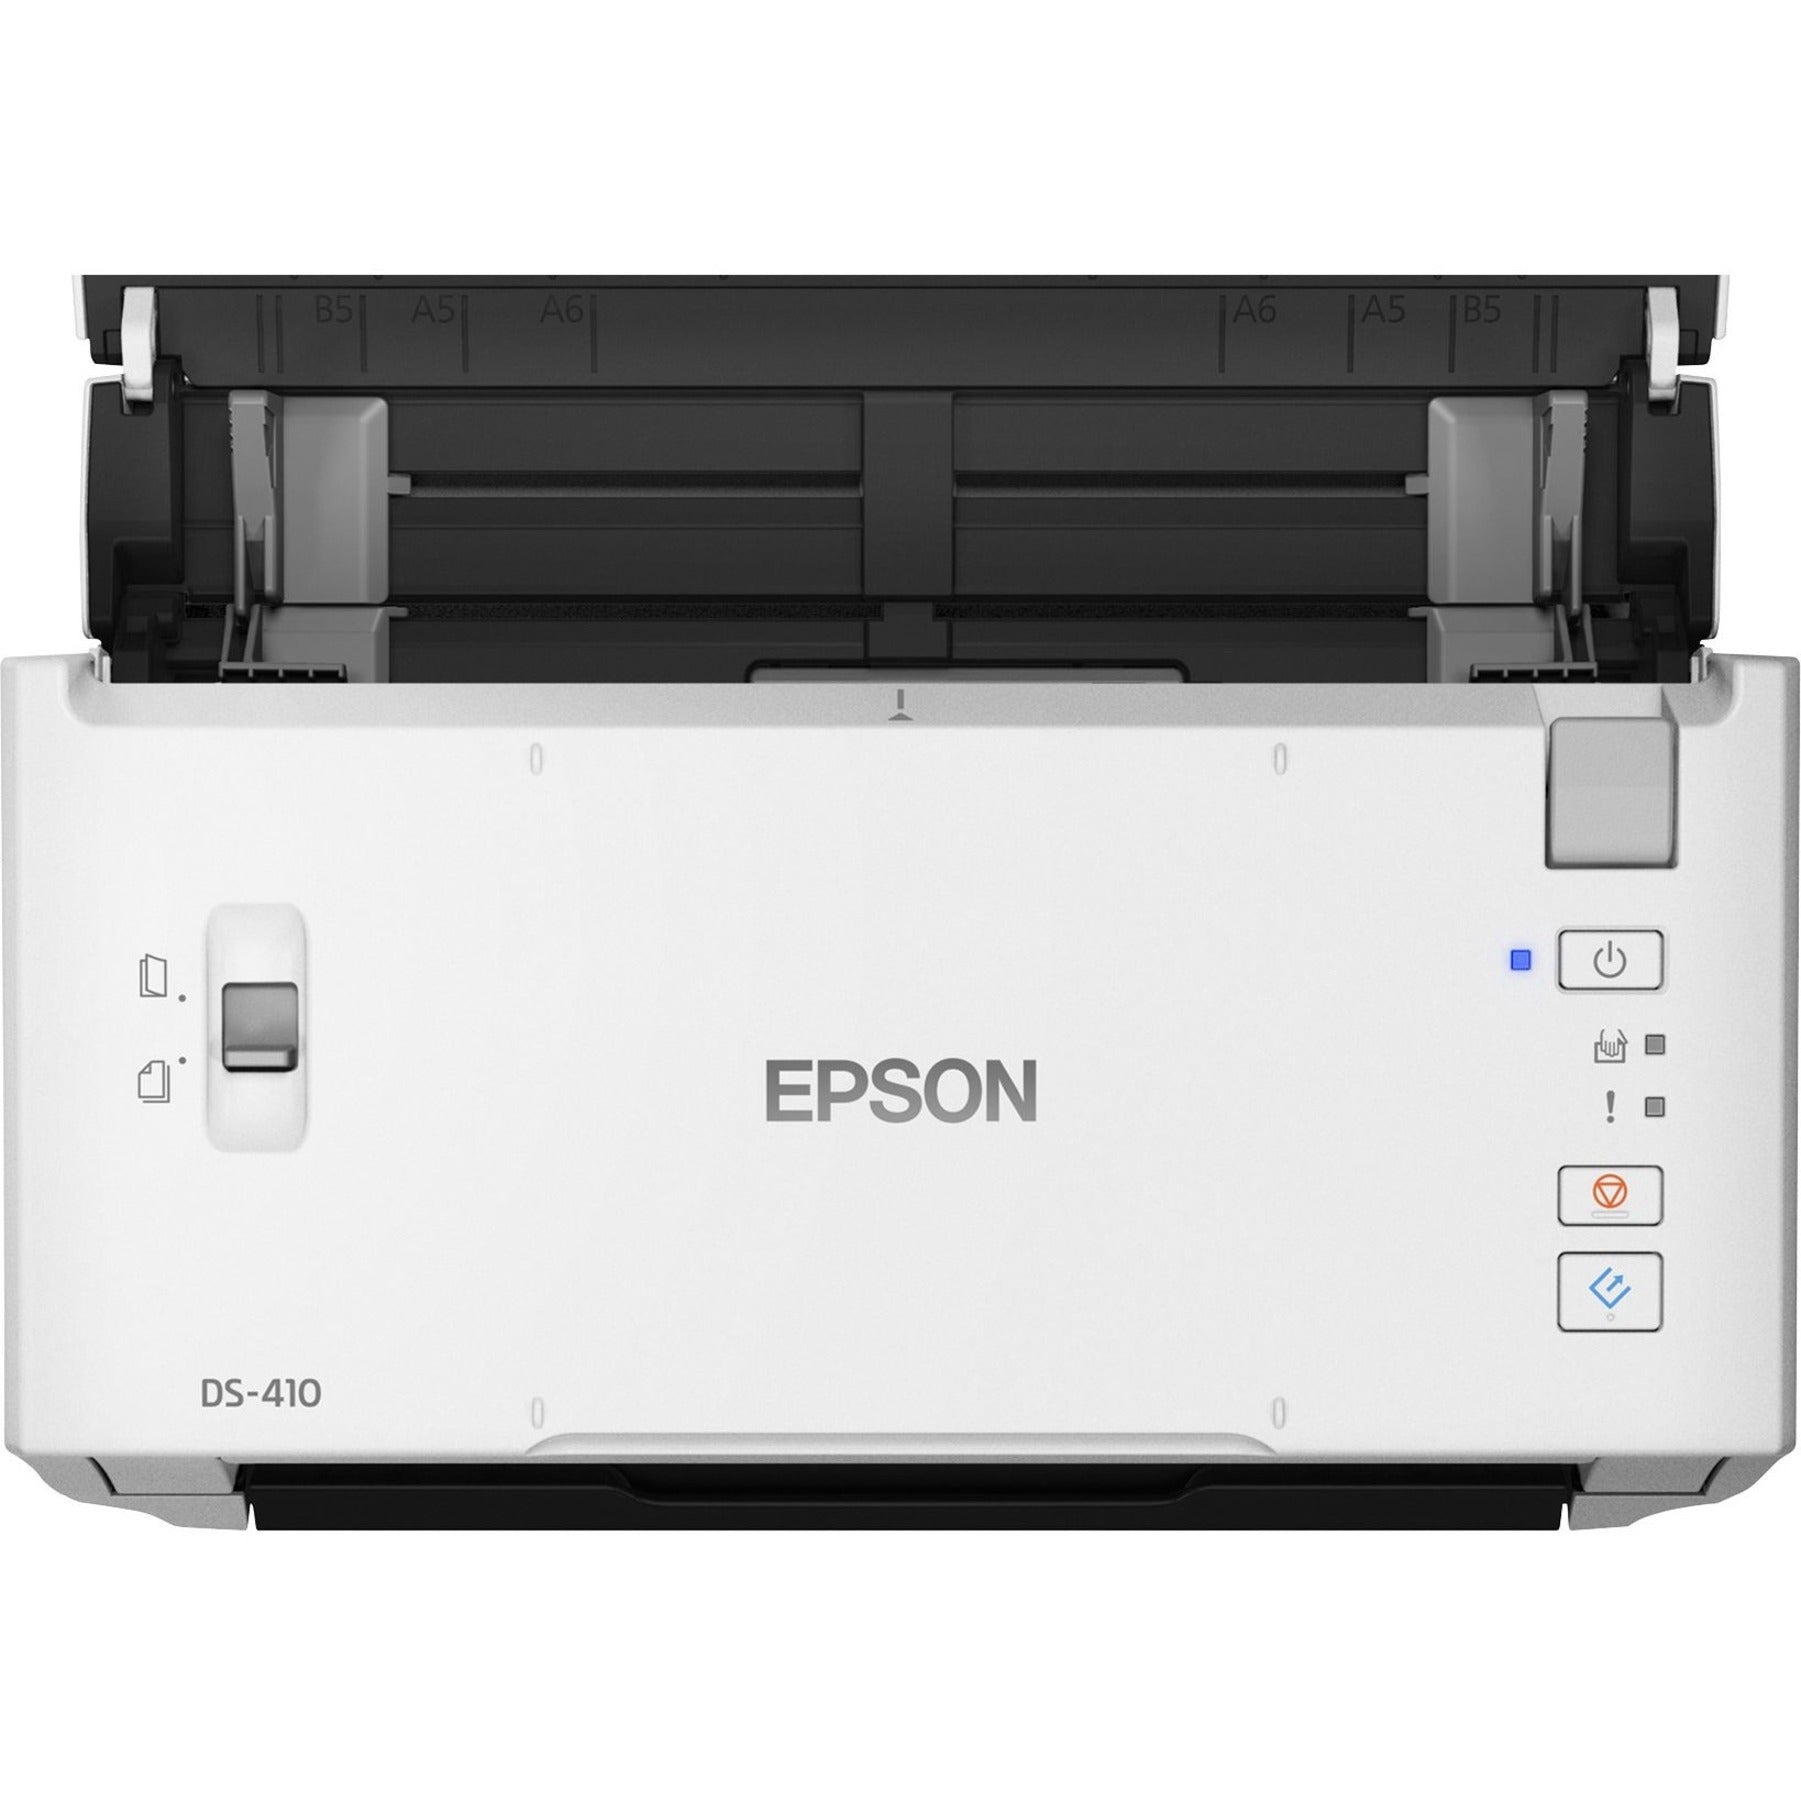 Epson DS-410 Sheetfed Scanner - 600 dpi Optical Top image